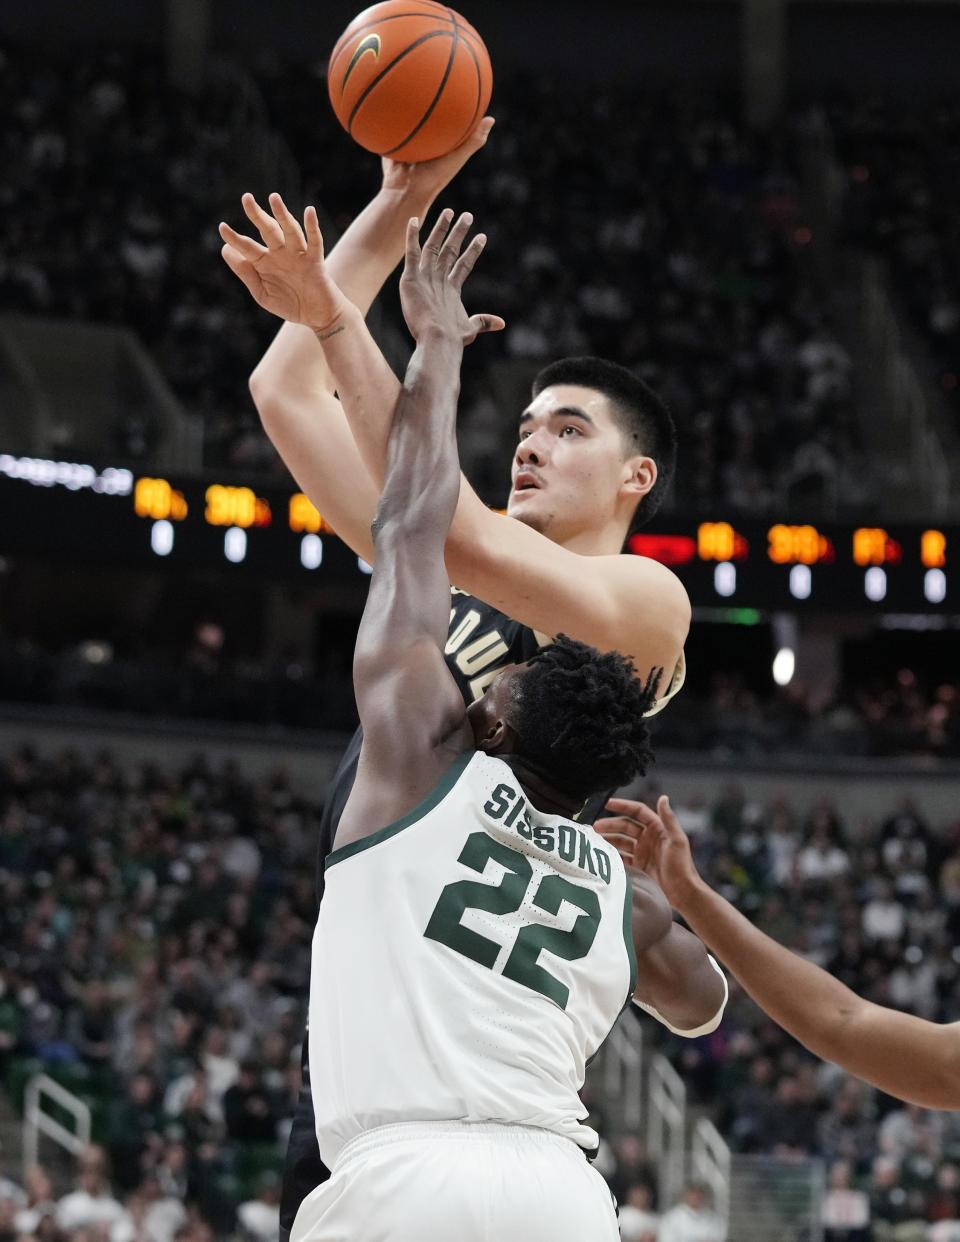 Purdue center Zach Edey shoots over the defense of Michigan State center Mady Sissoko (22) during the first half of an NCAA college basketball game, Monday, Jan. 16, 2023, in East Lansing, Mich. (AP Photo/Carlos Osorio)